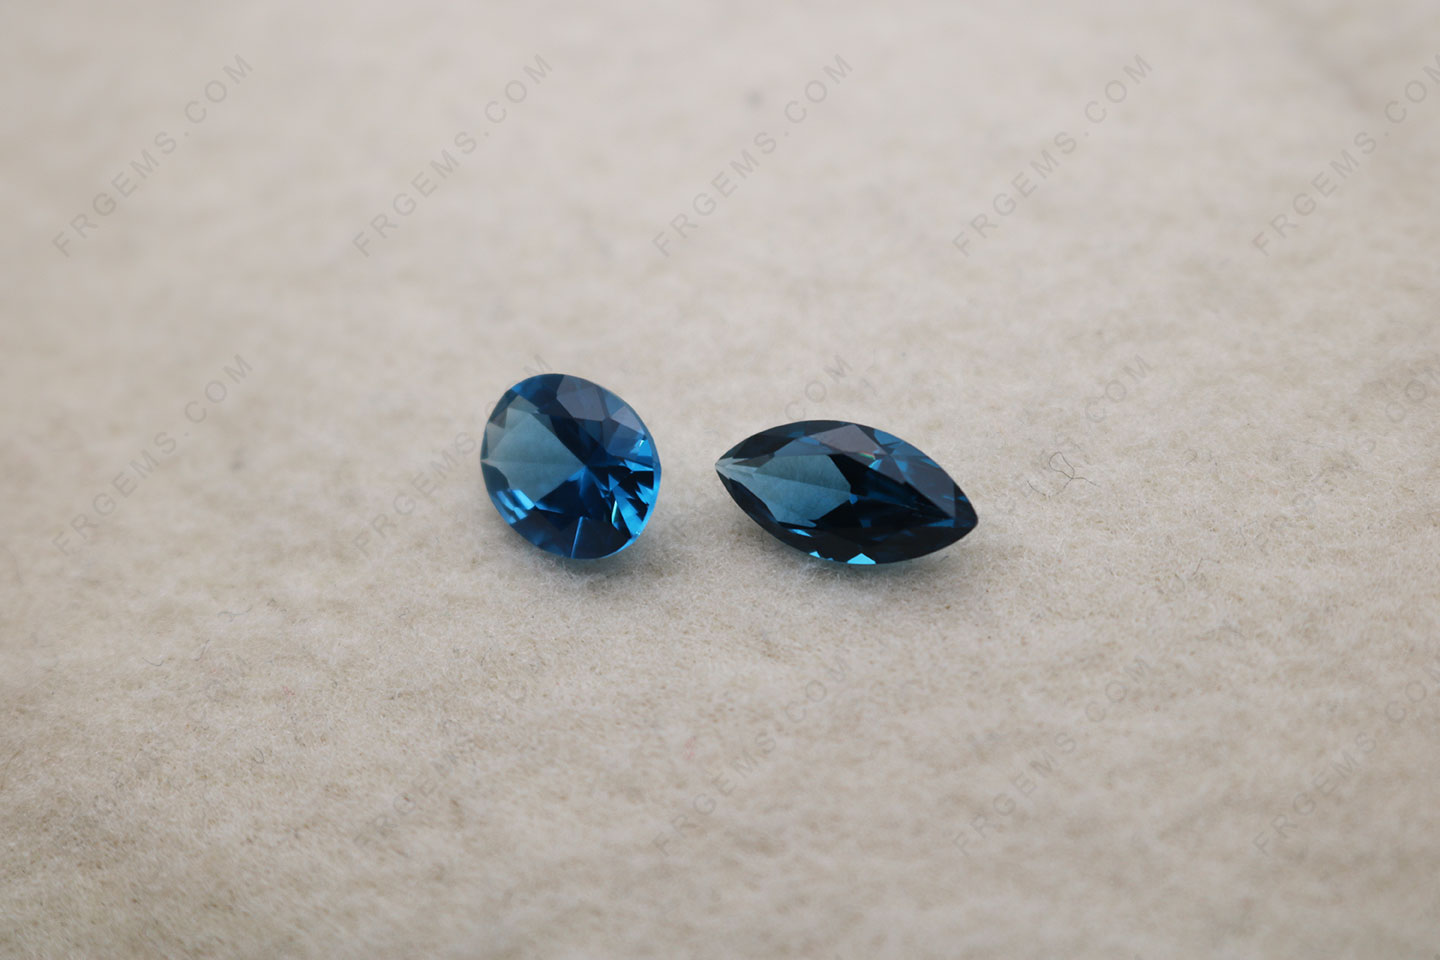 Wholesale Spinel London blue 120# color Oval and Marquise shape faceted cut gemstones from China